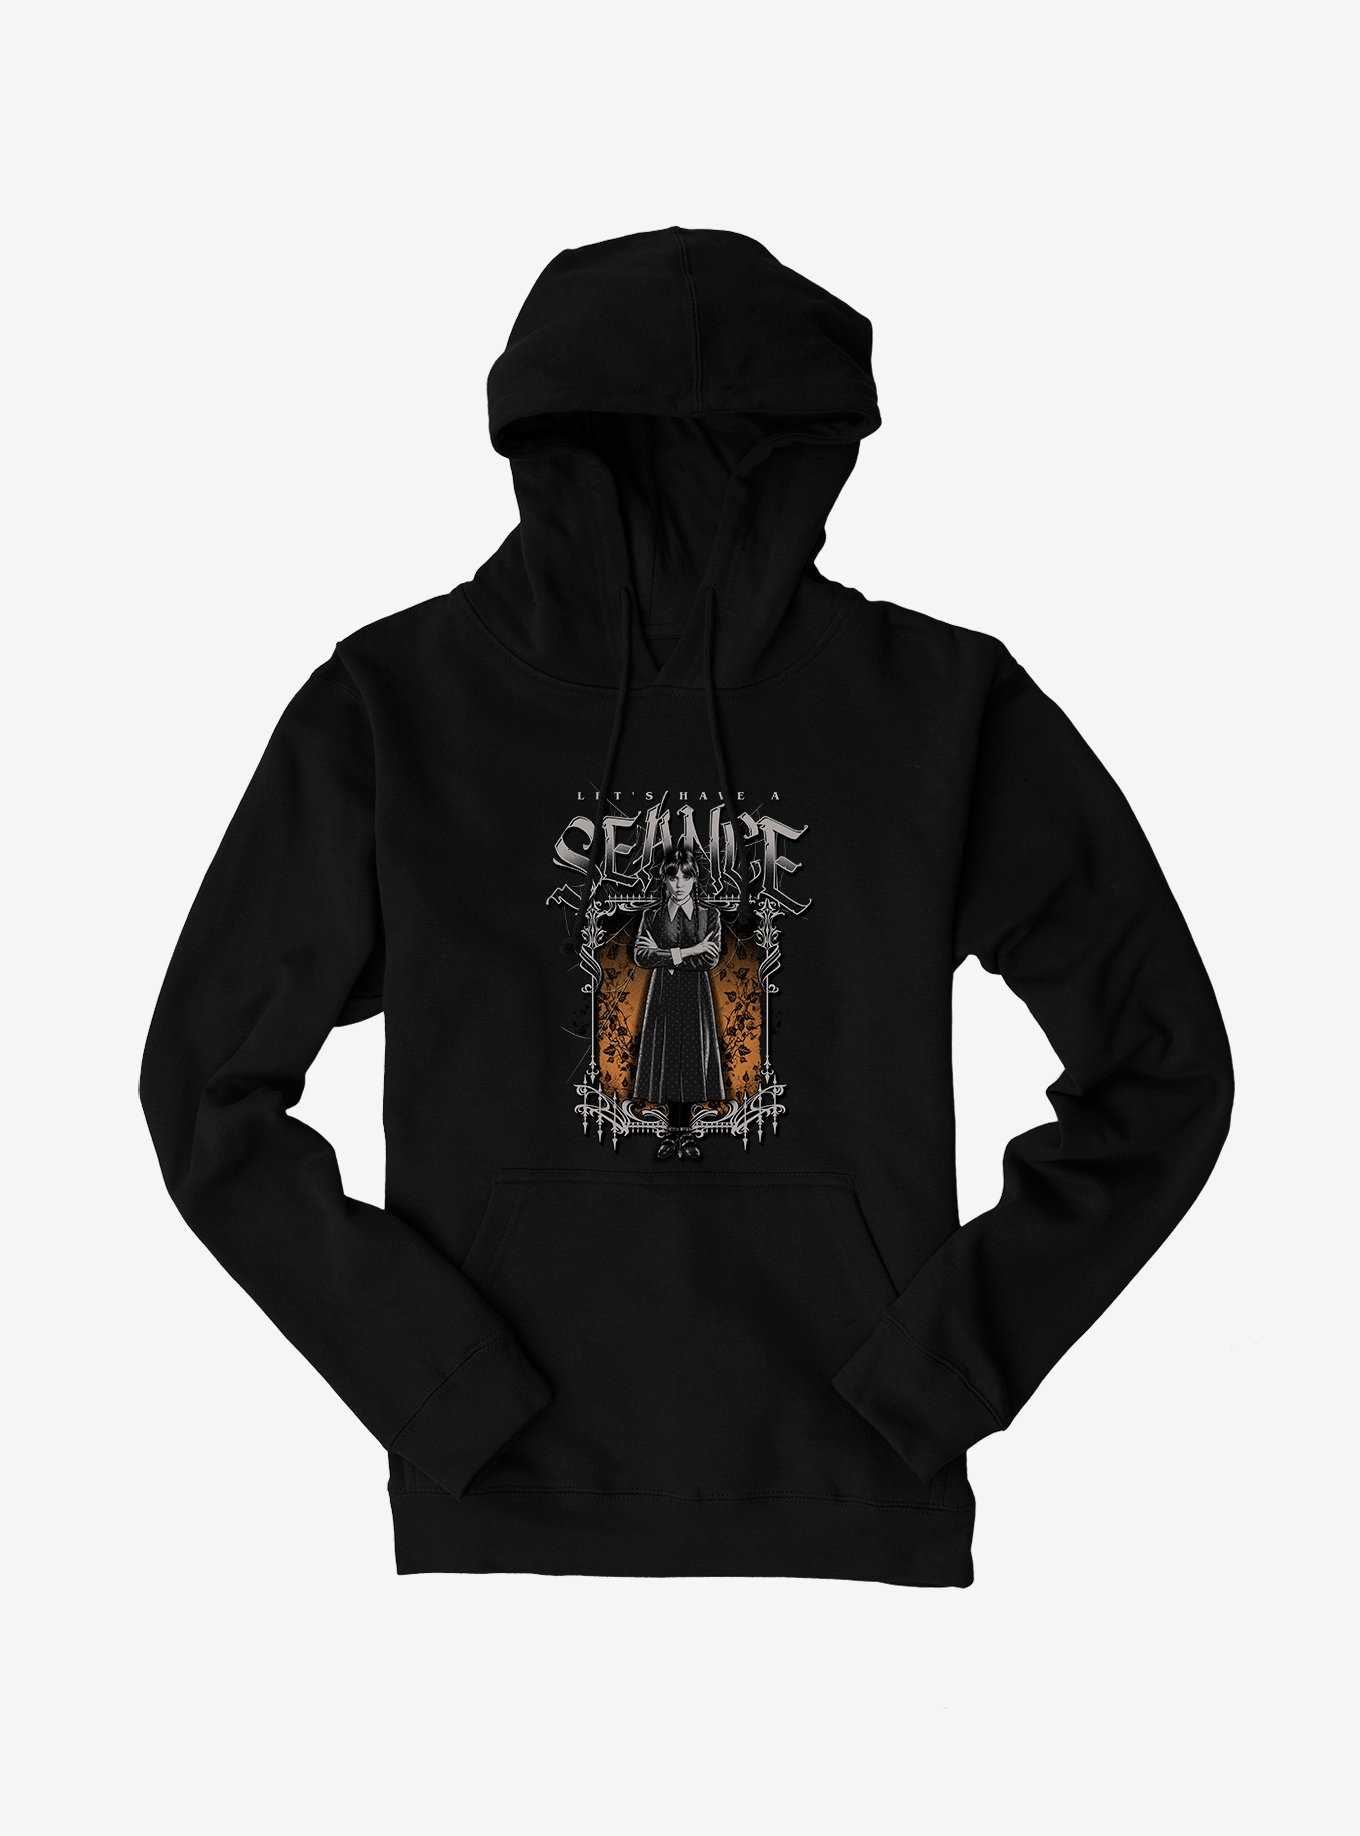 Wednesday Let's Have A Seance Hoodie, , hi-res